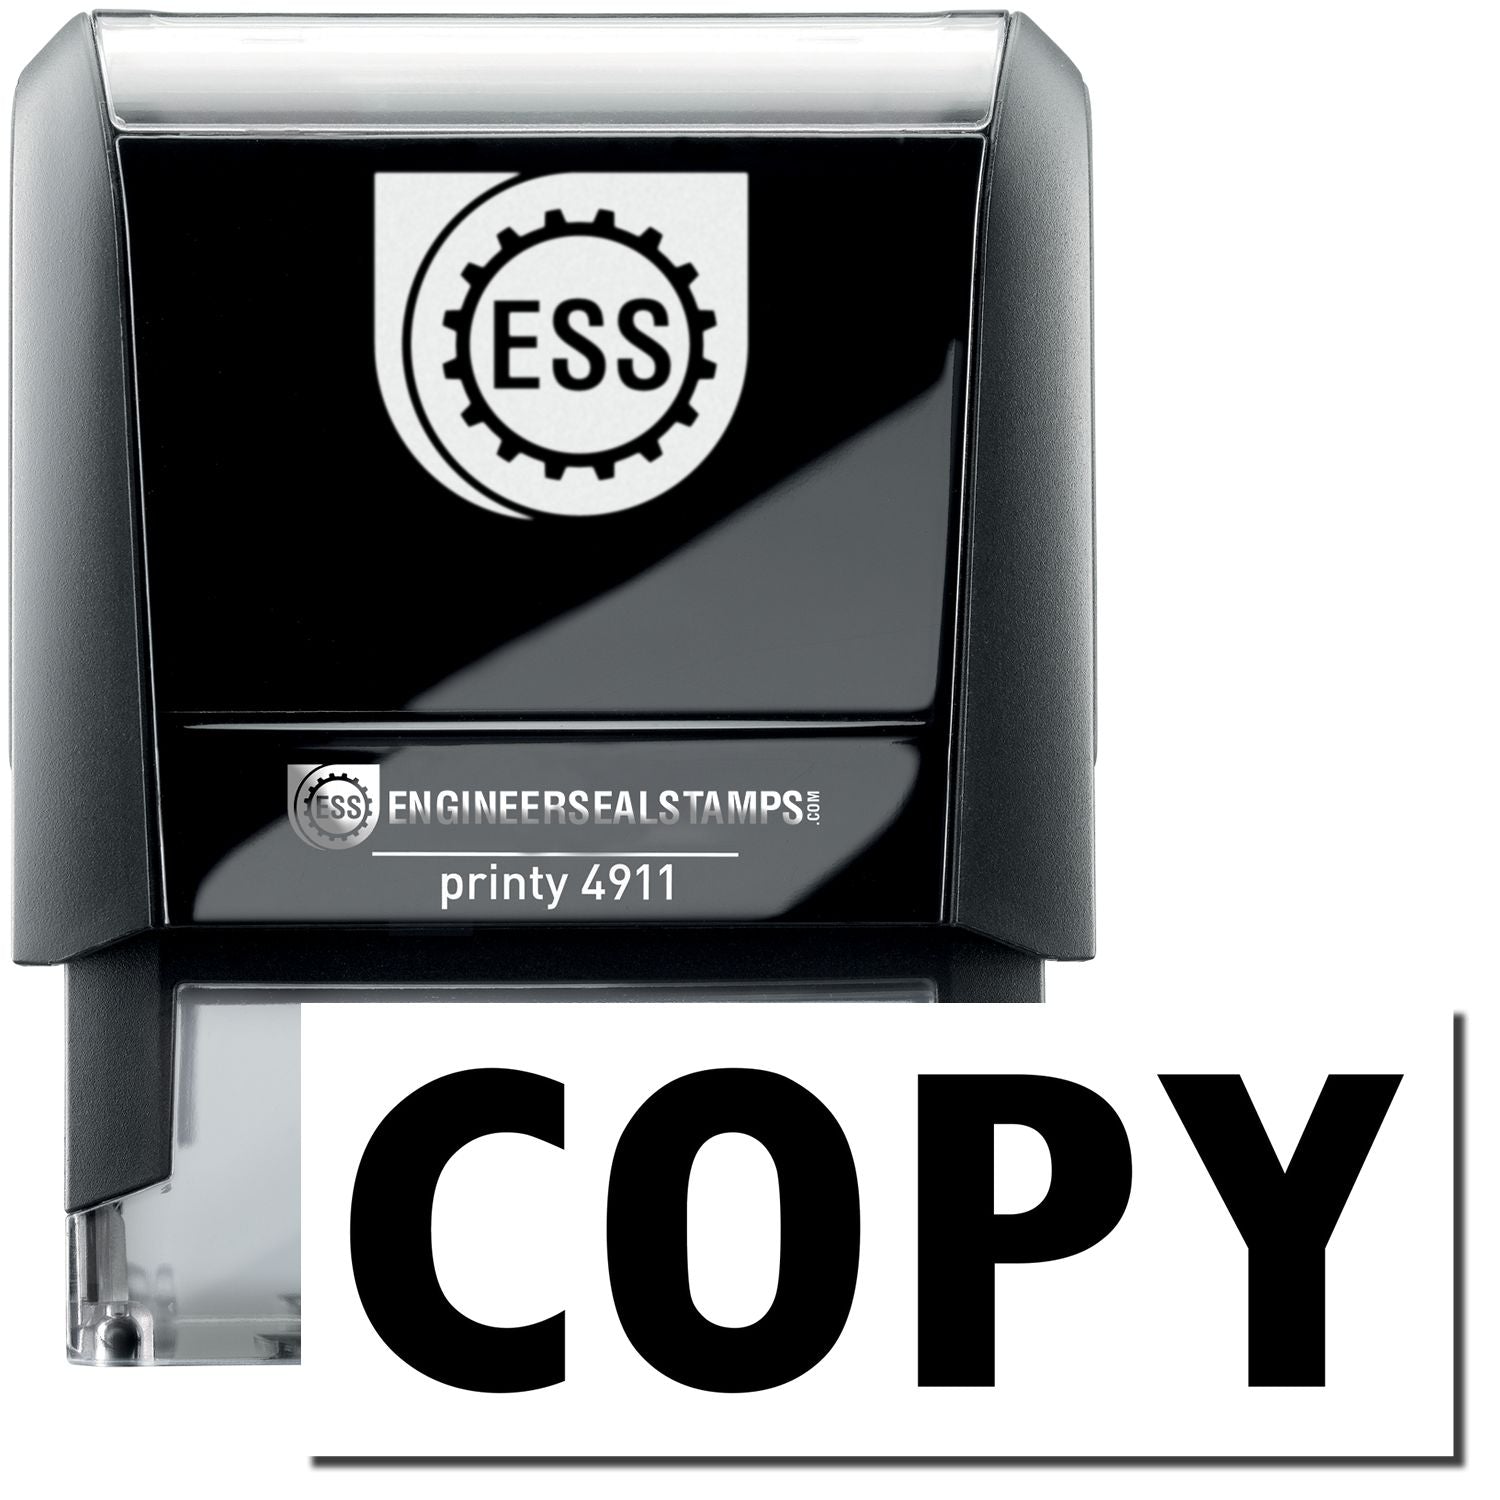 A self-inking stamp with a stamped image showing how the text "COPY" is displayed after stamping.